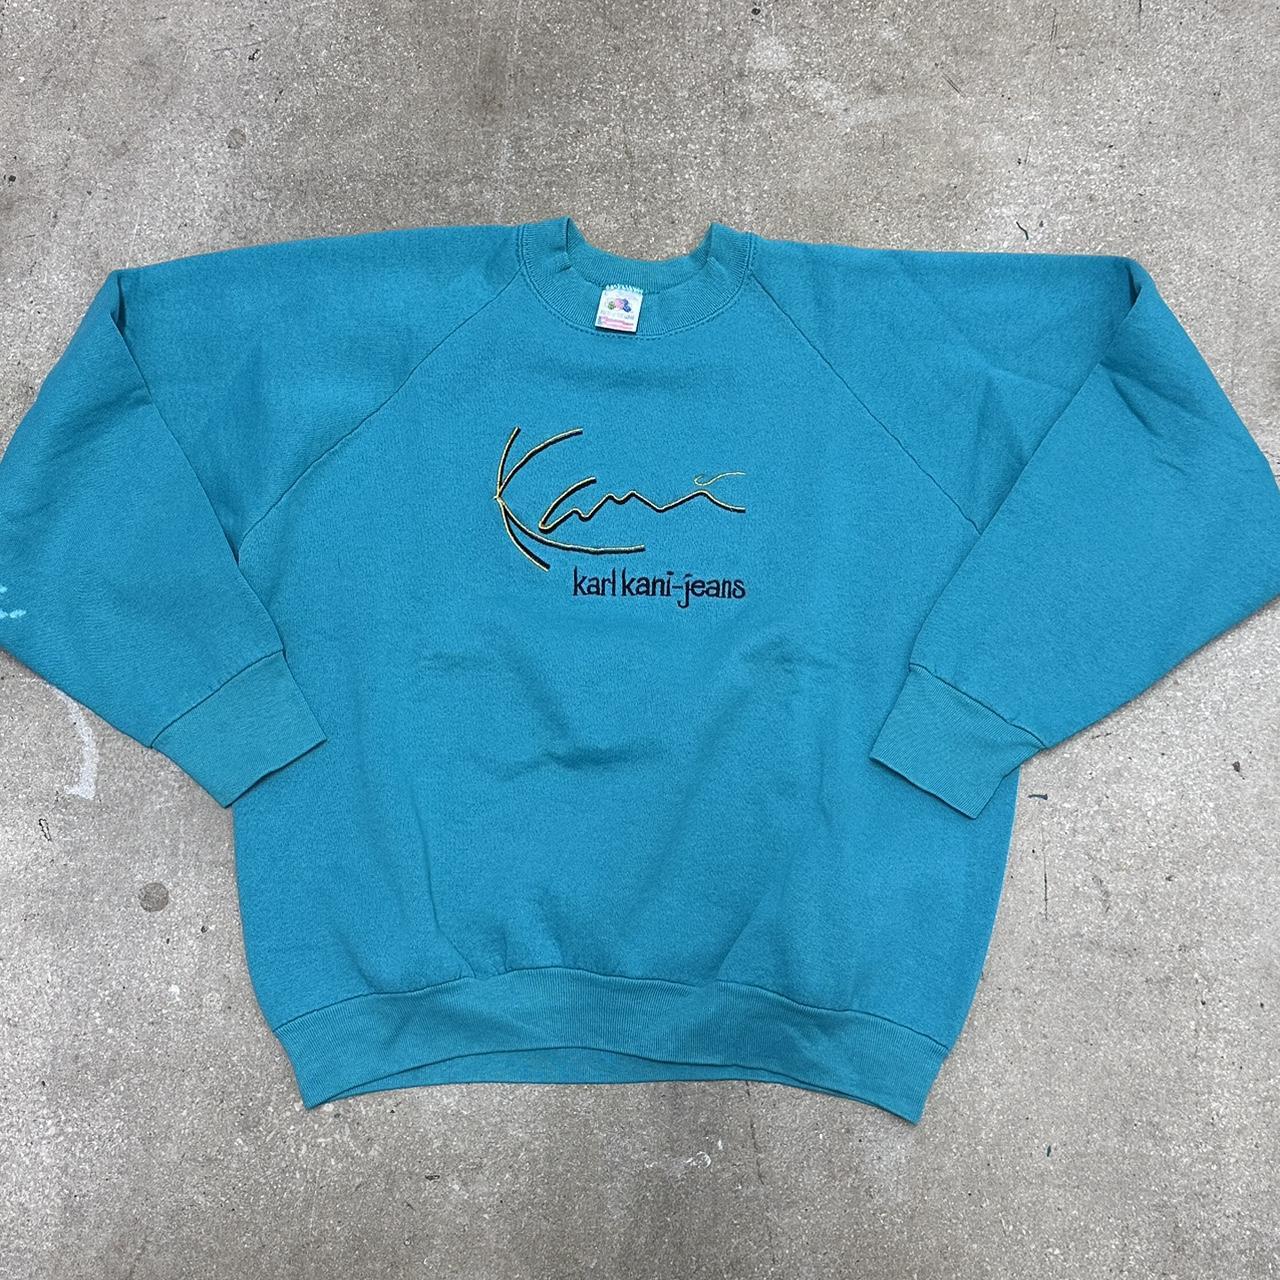 item listed by thriftingbyp